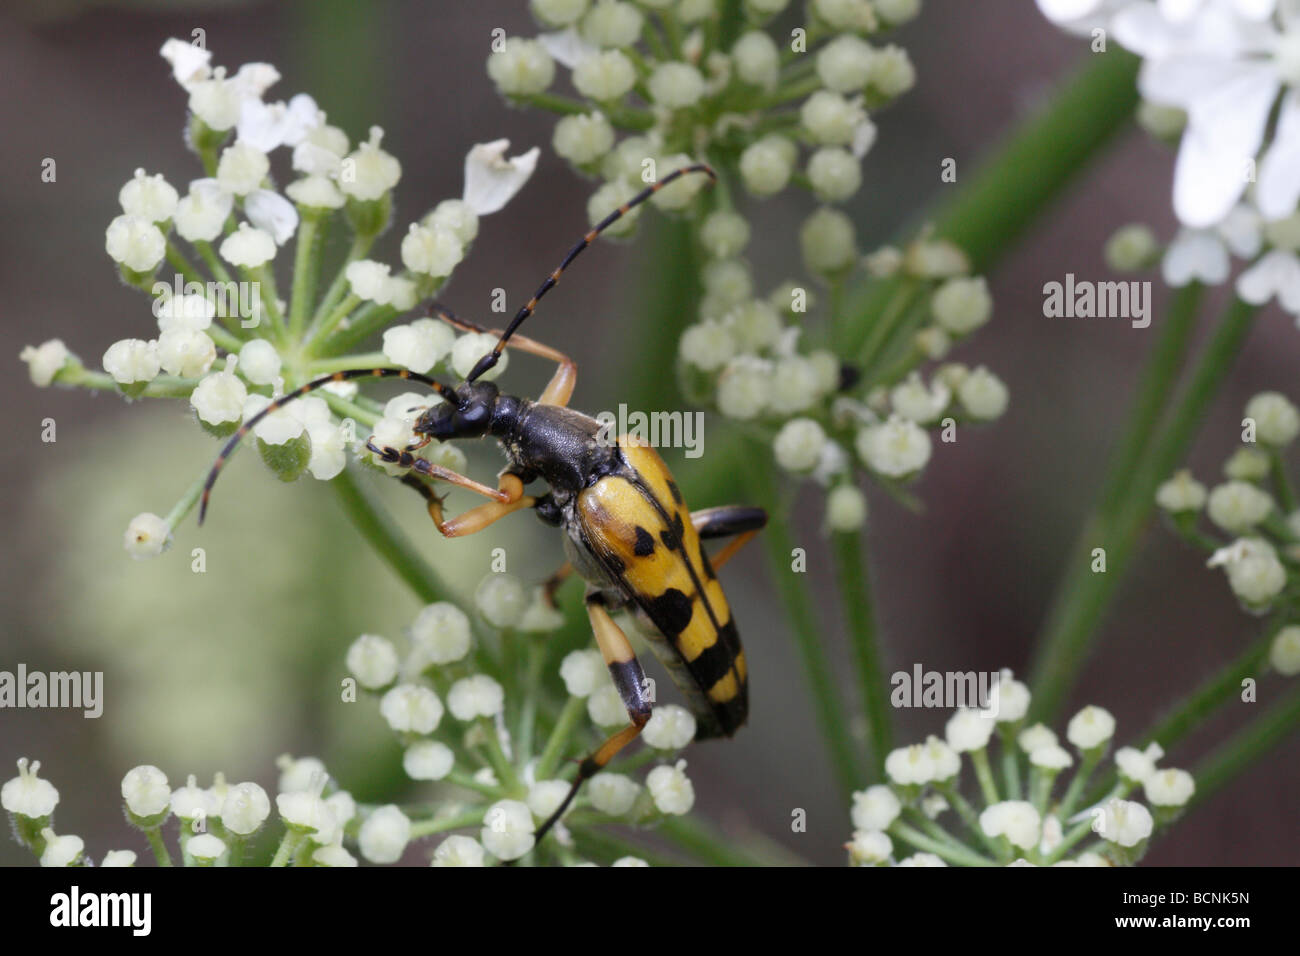 Rutpela maculata, a longhorn beetle (used to be called Strangalia maculata), snacking on a flower. Stock Photo